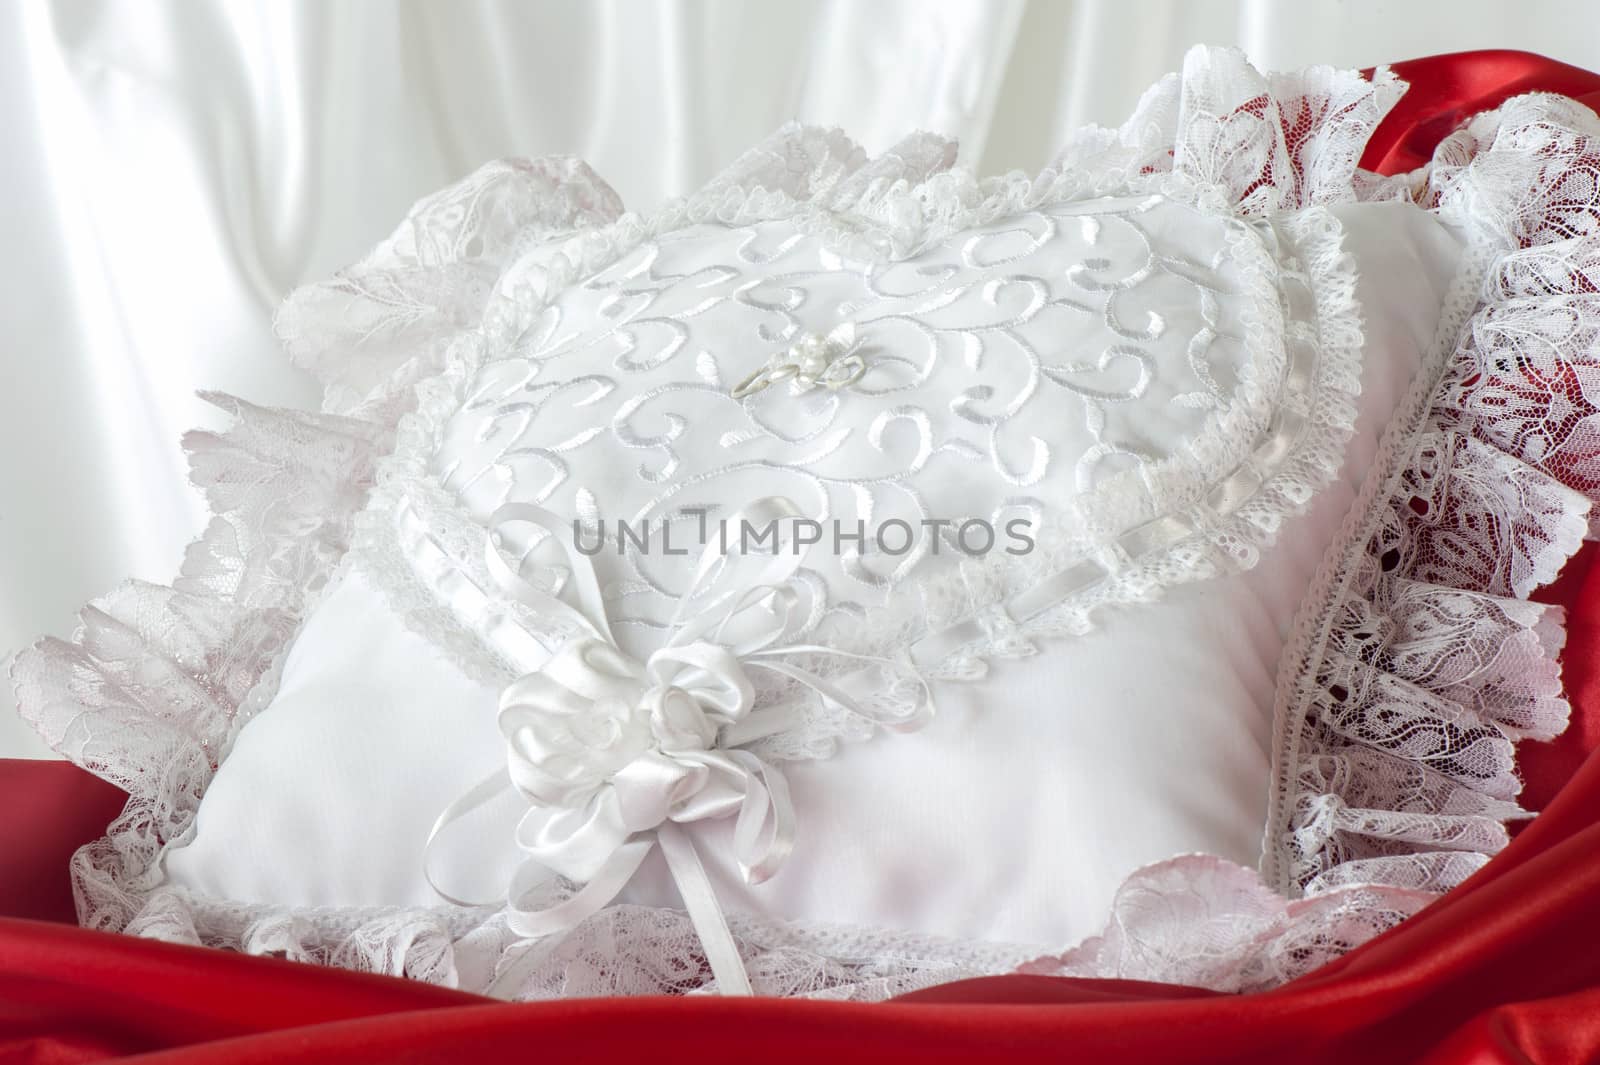 a whitw pillow for a wedding rings